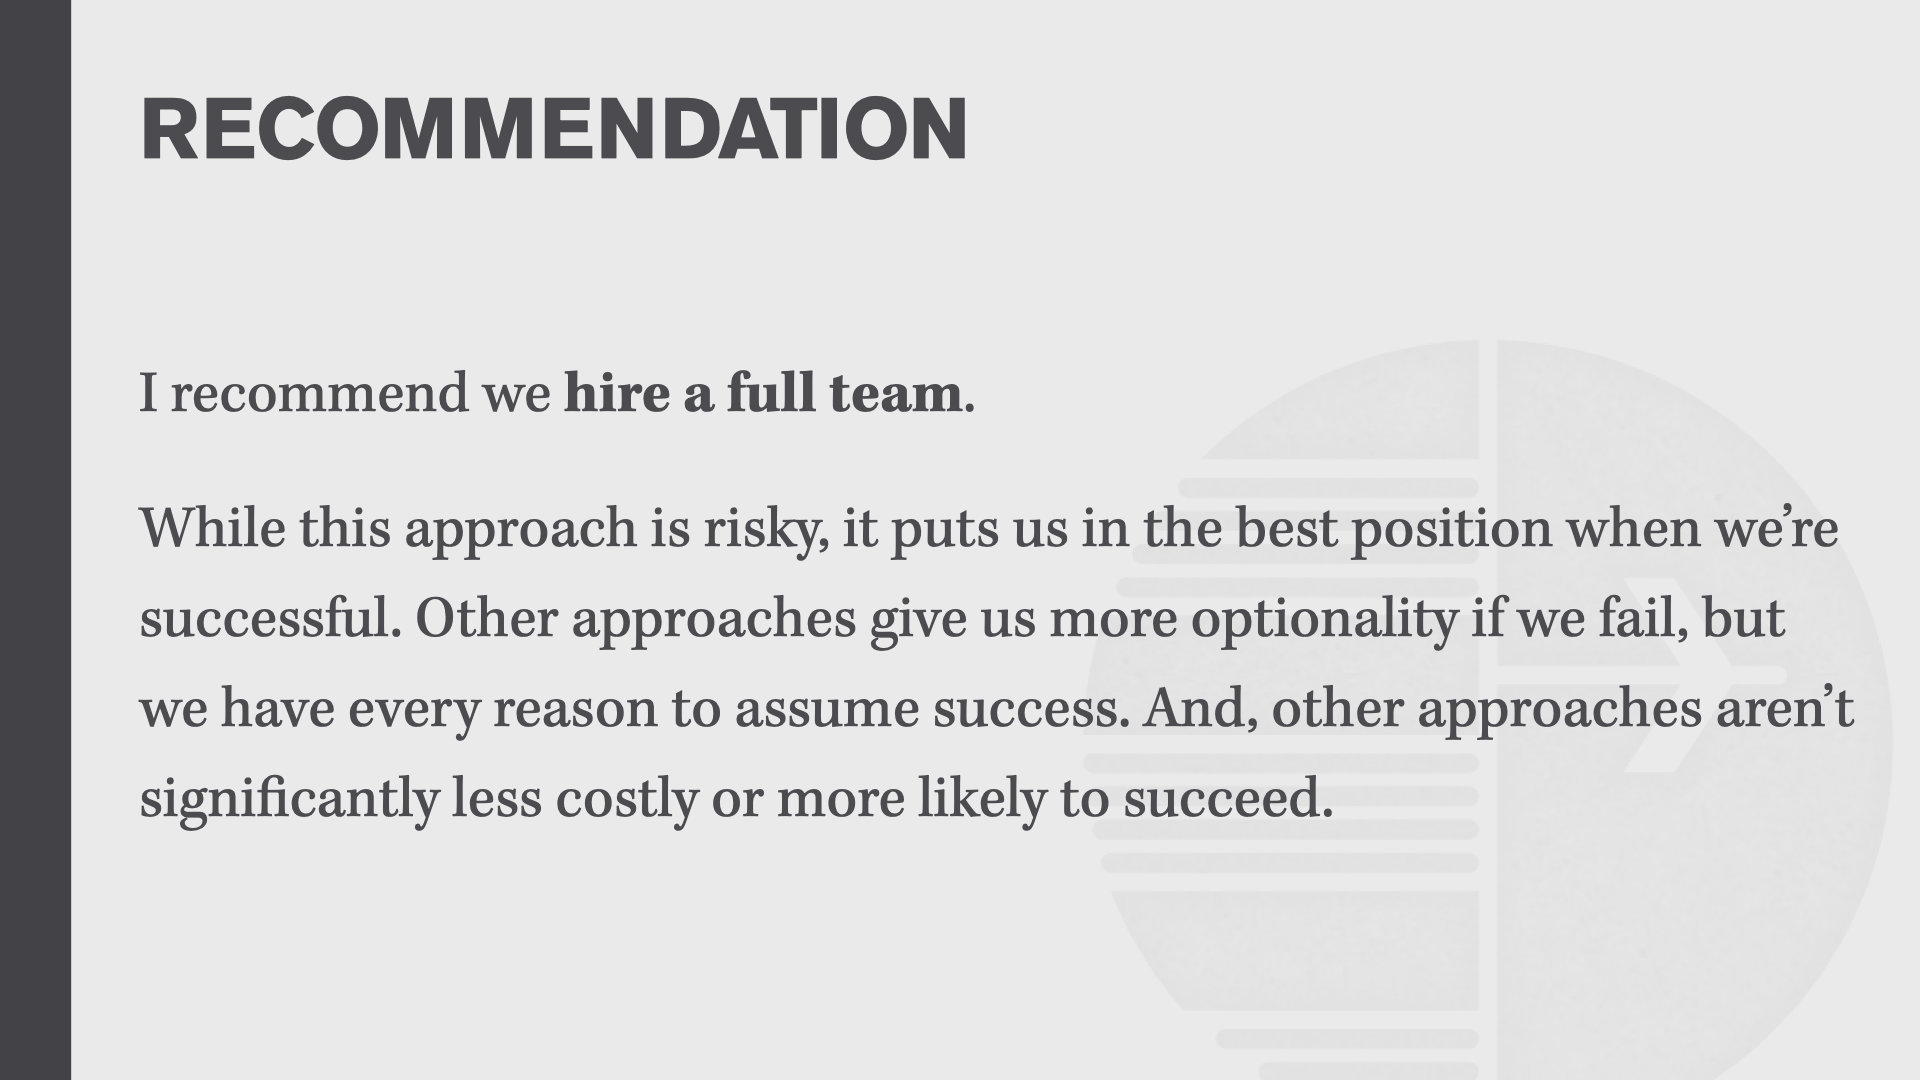 RECOMMENDATION: recommend hiring a full team